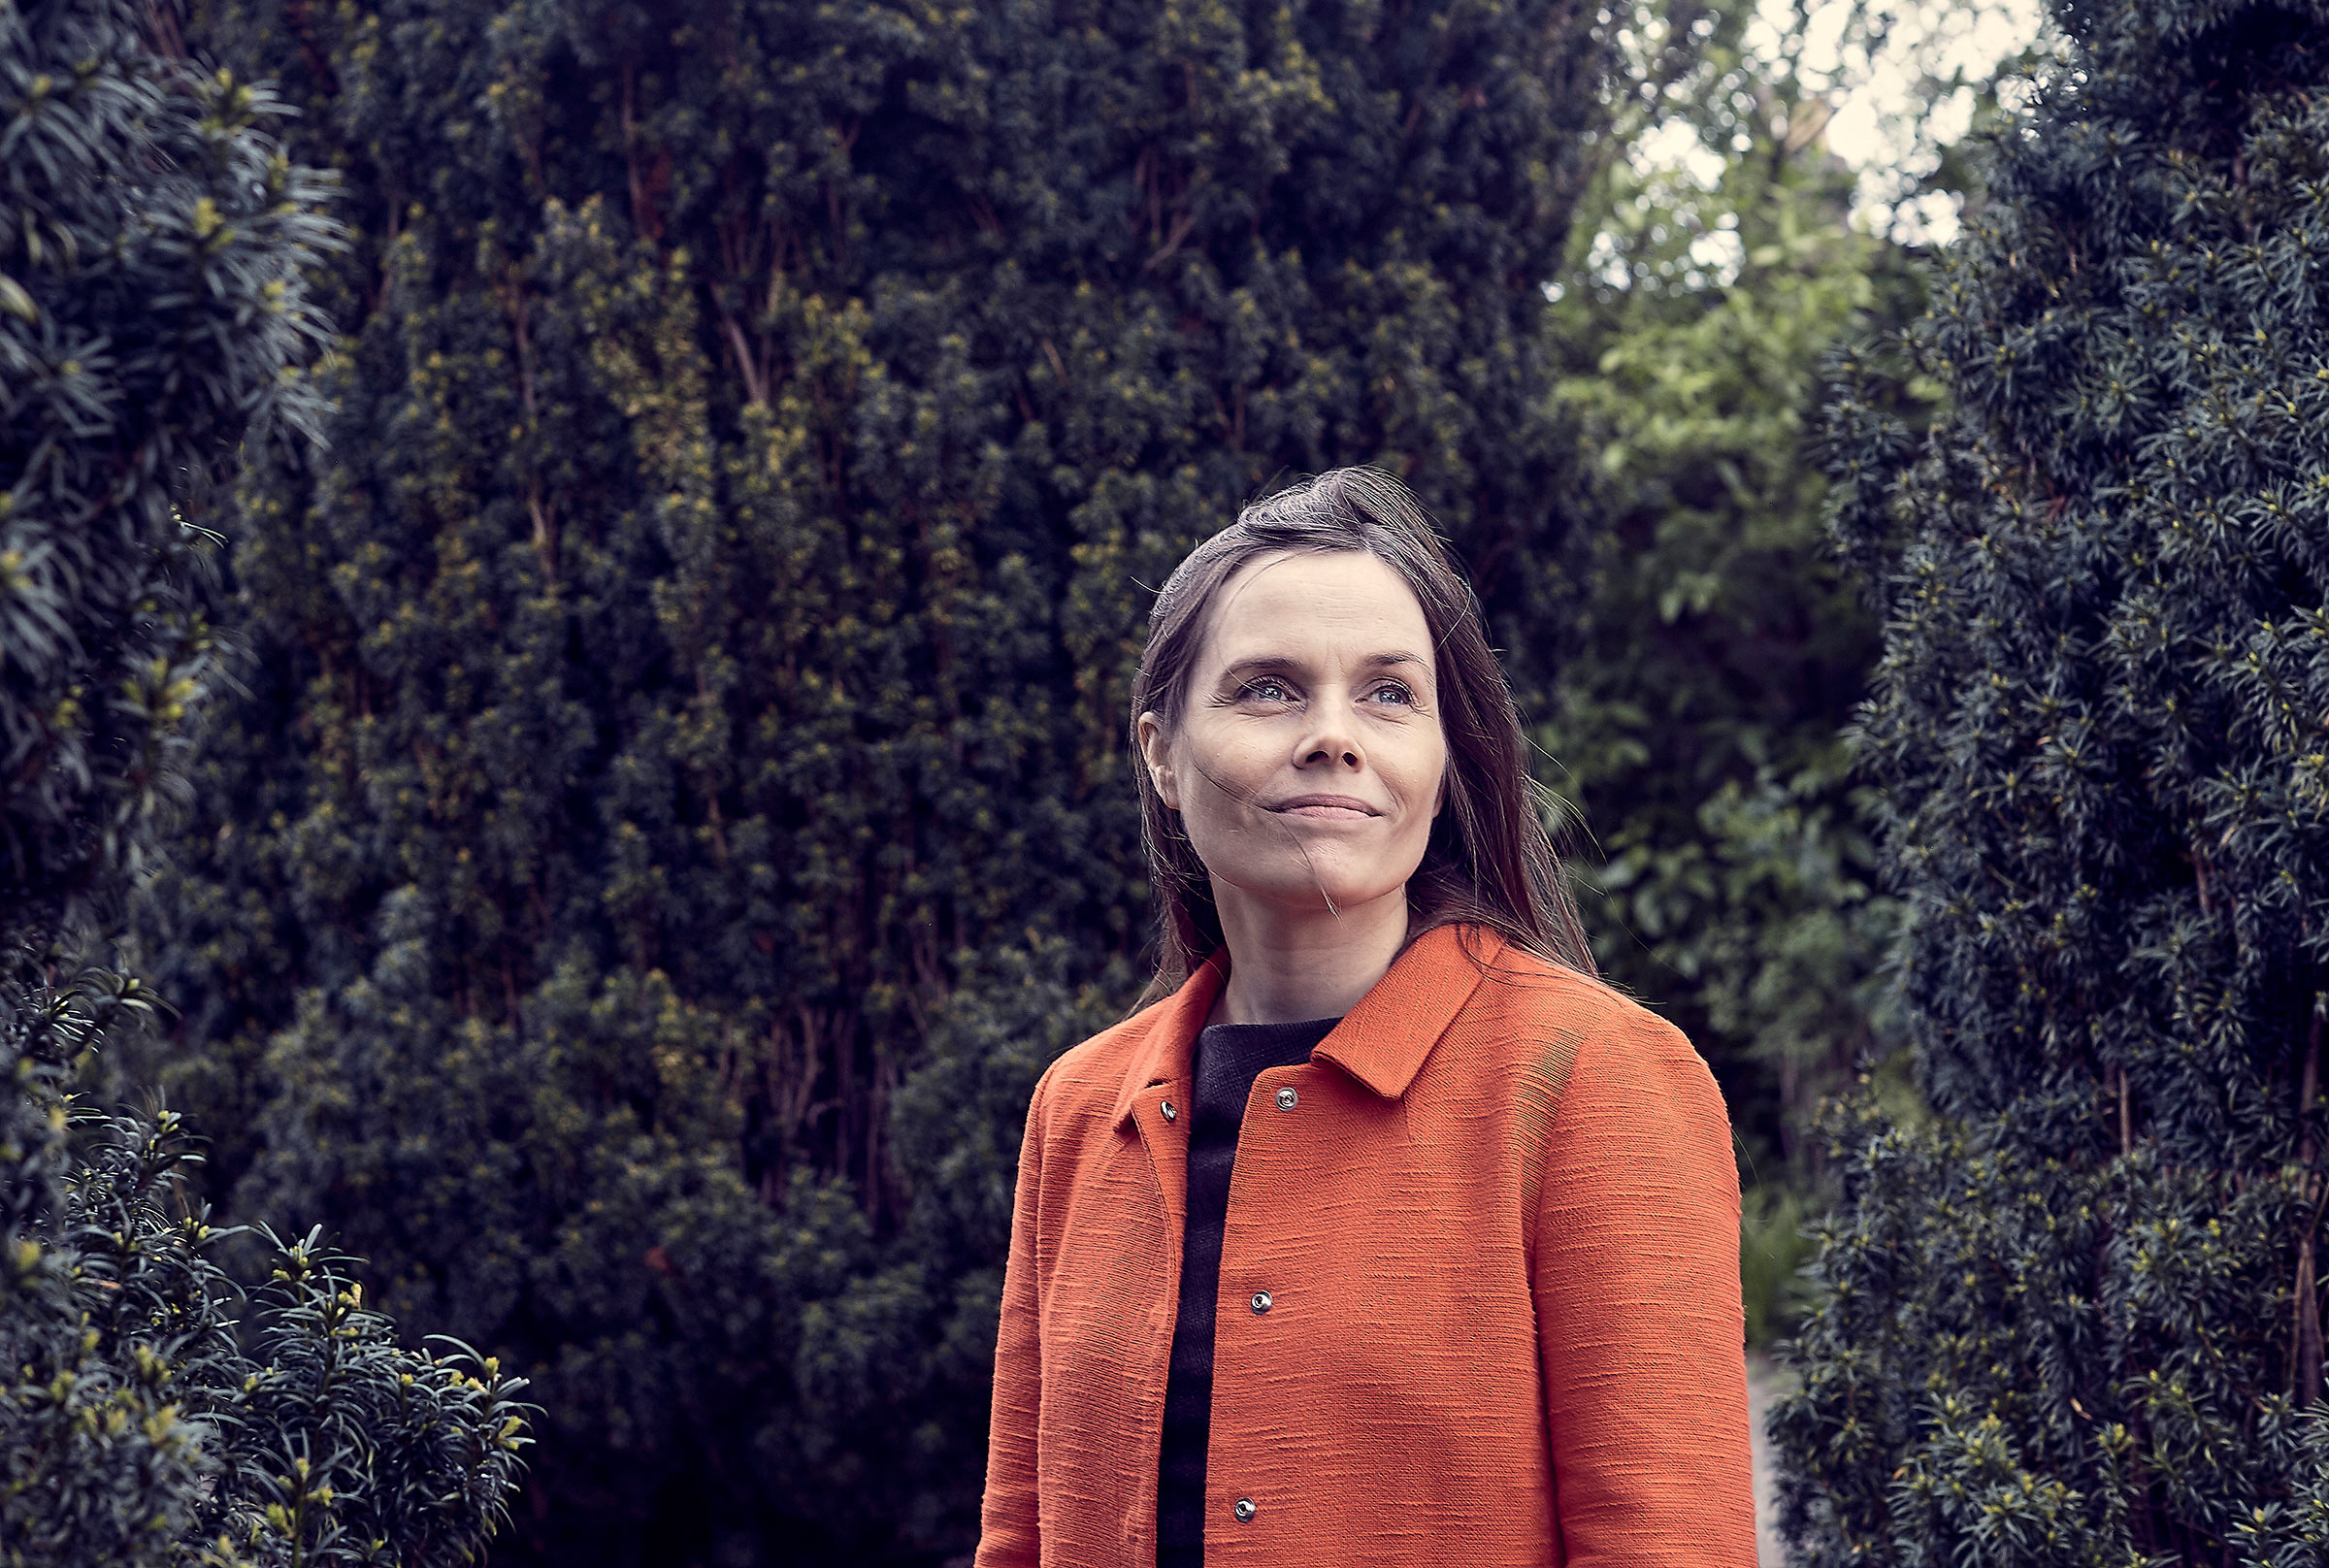 “It can be an advantage to be small. You can do things bigger and faster,” says Katrin Jakobsdottir, Prime Minister of Iceland. (Olivia Harris for TIME)